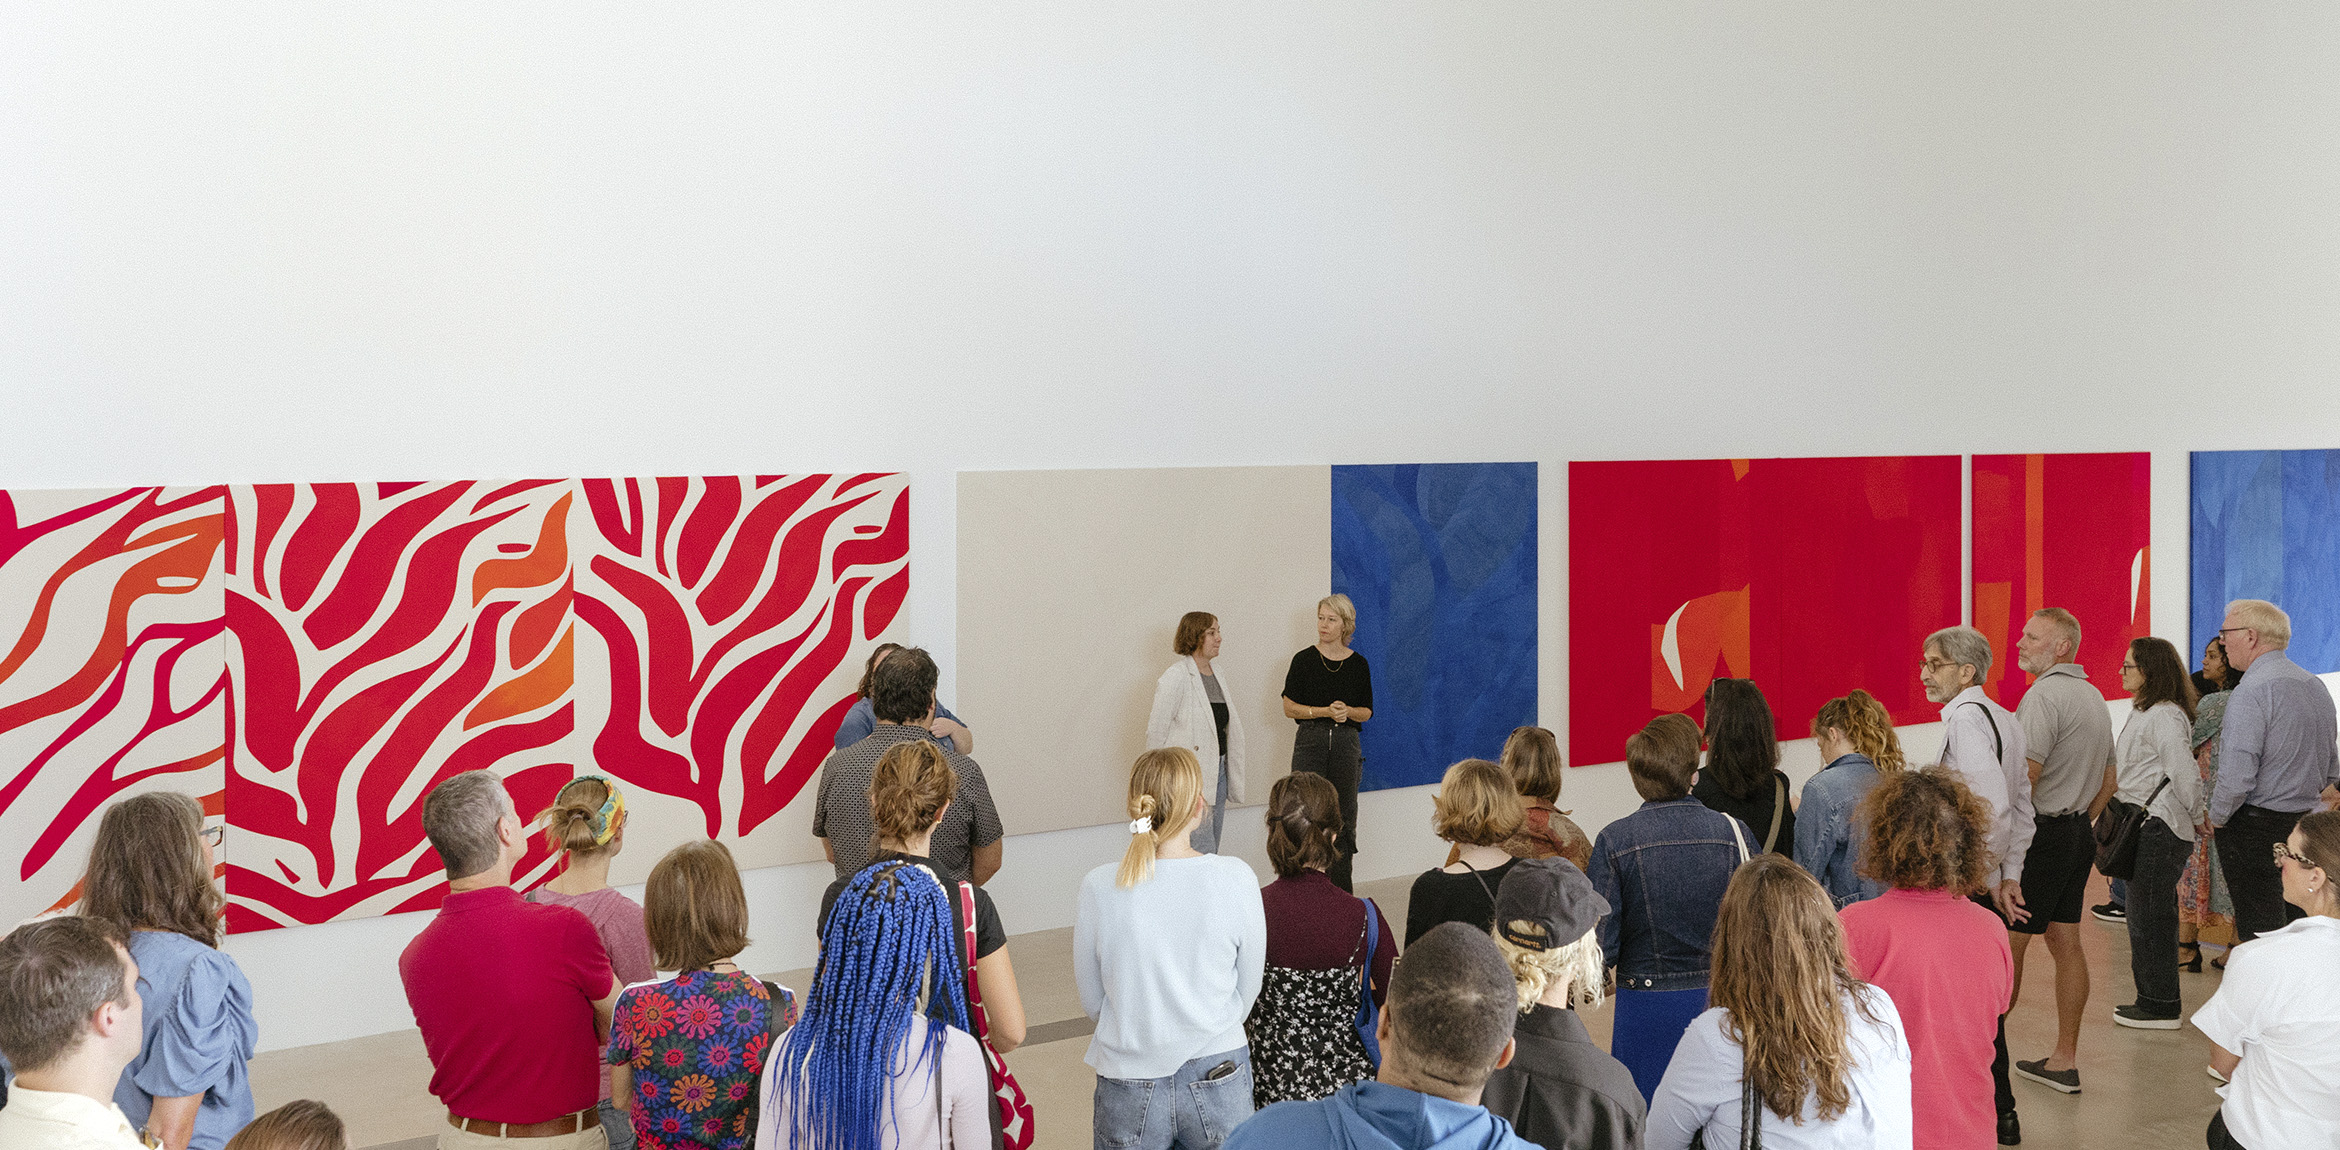 Sarah Crowner and Stephanie Weissberg in front of two large crowner paintings while a crowd looks on